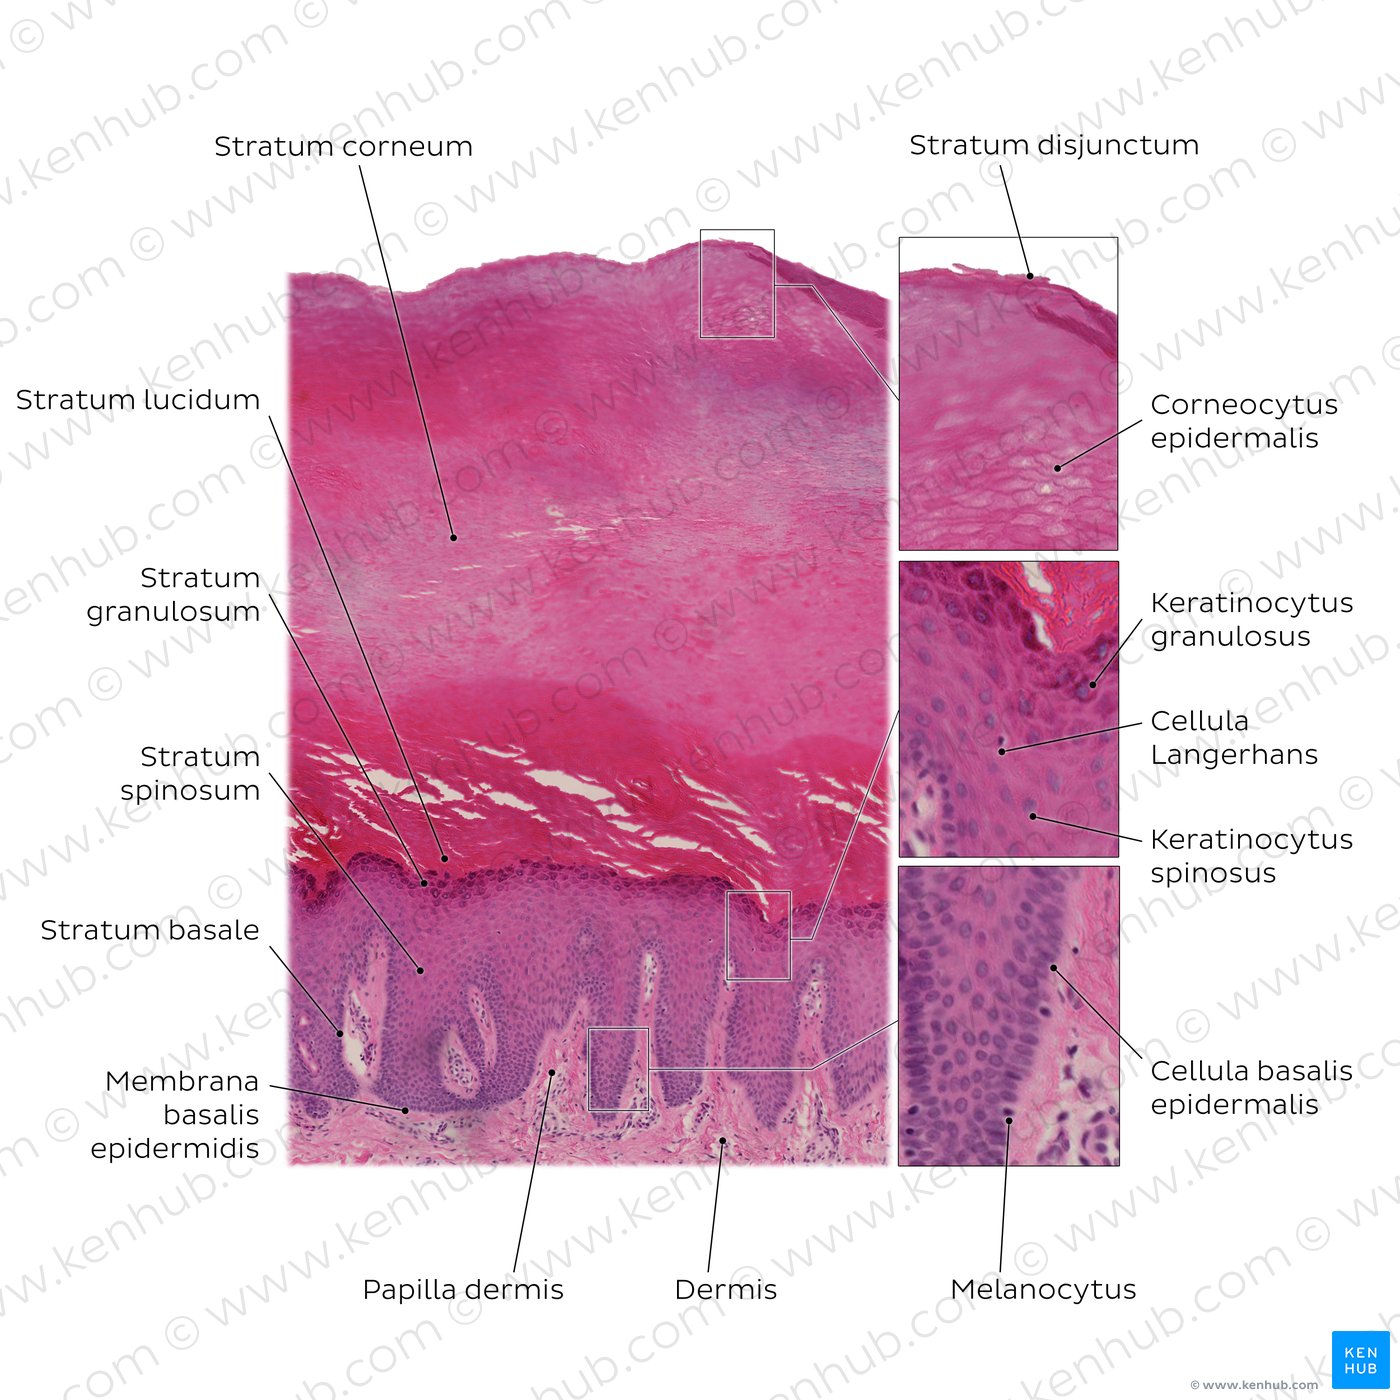 Layers of the epidermis. Stain: H&E. Medium magnification.